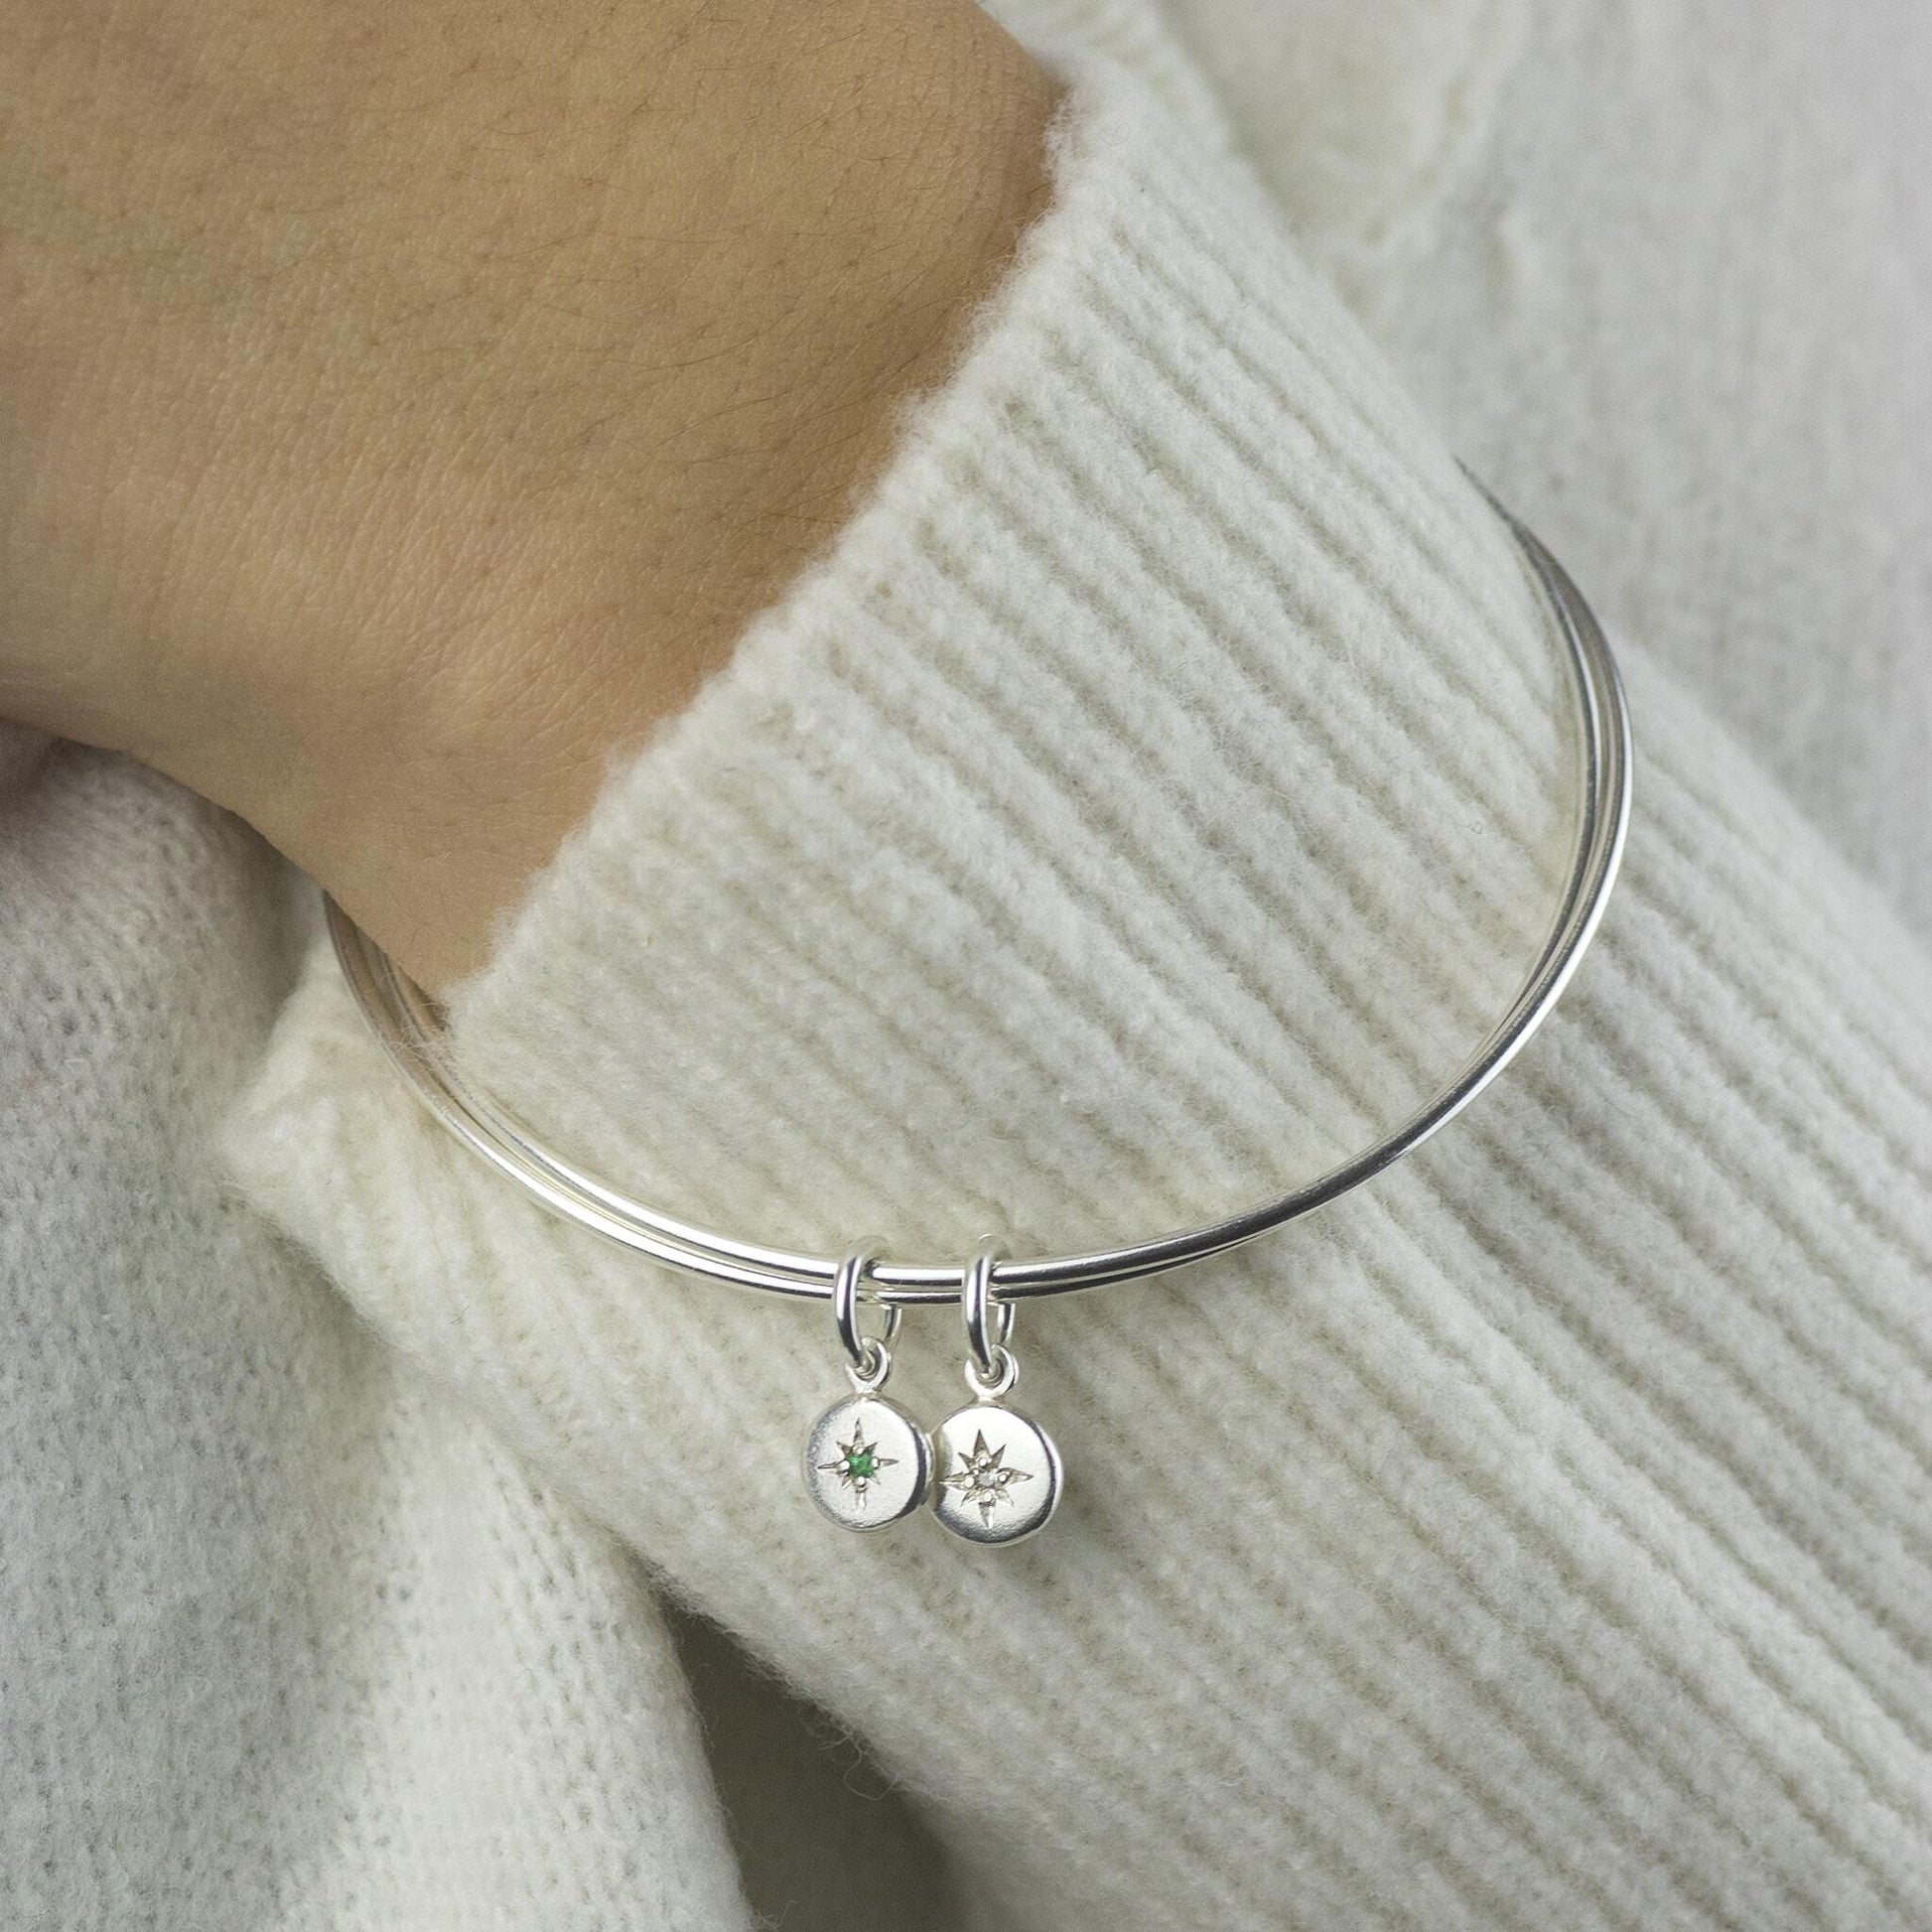 Sisters Bracelet - Double Linked Bangle - 2 Birthstones for 2 Sisters